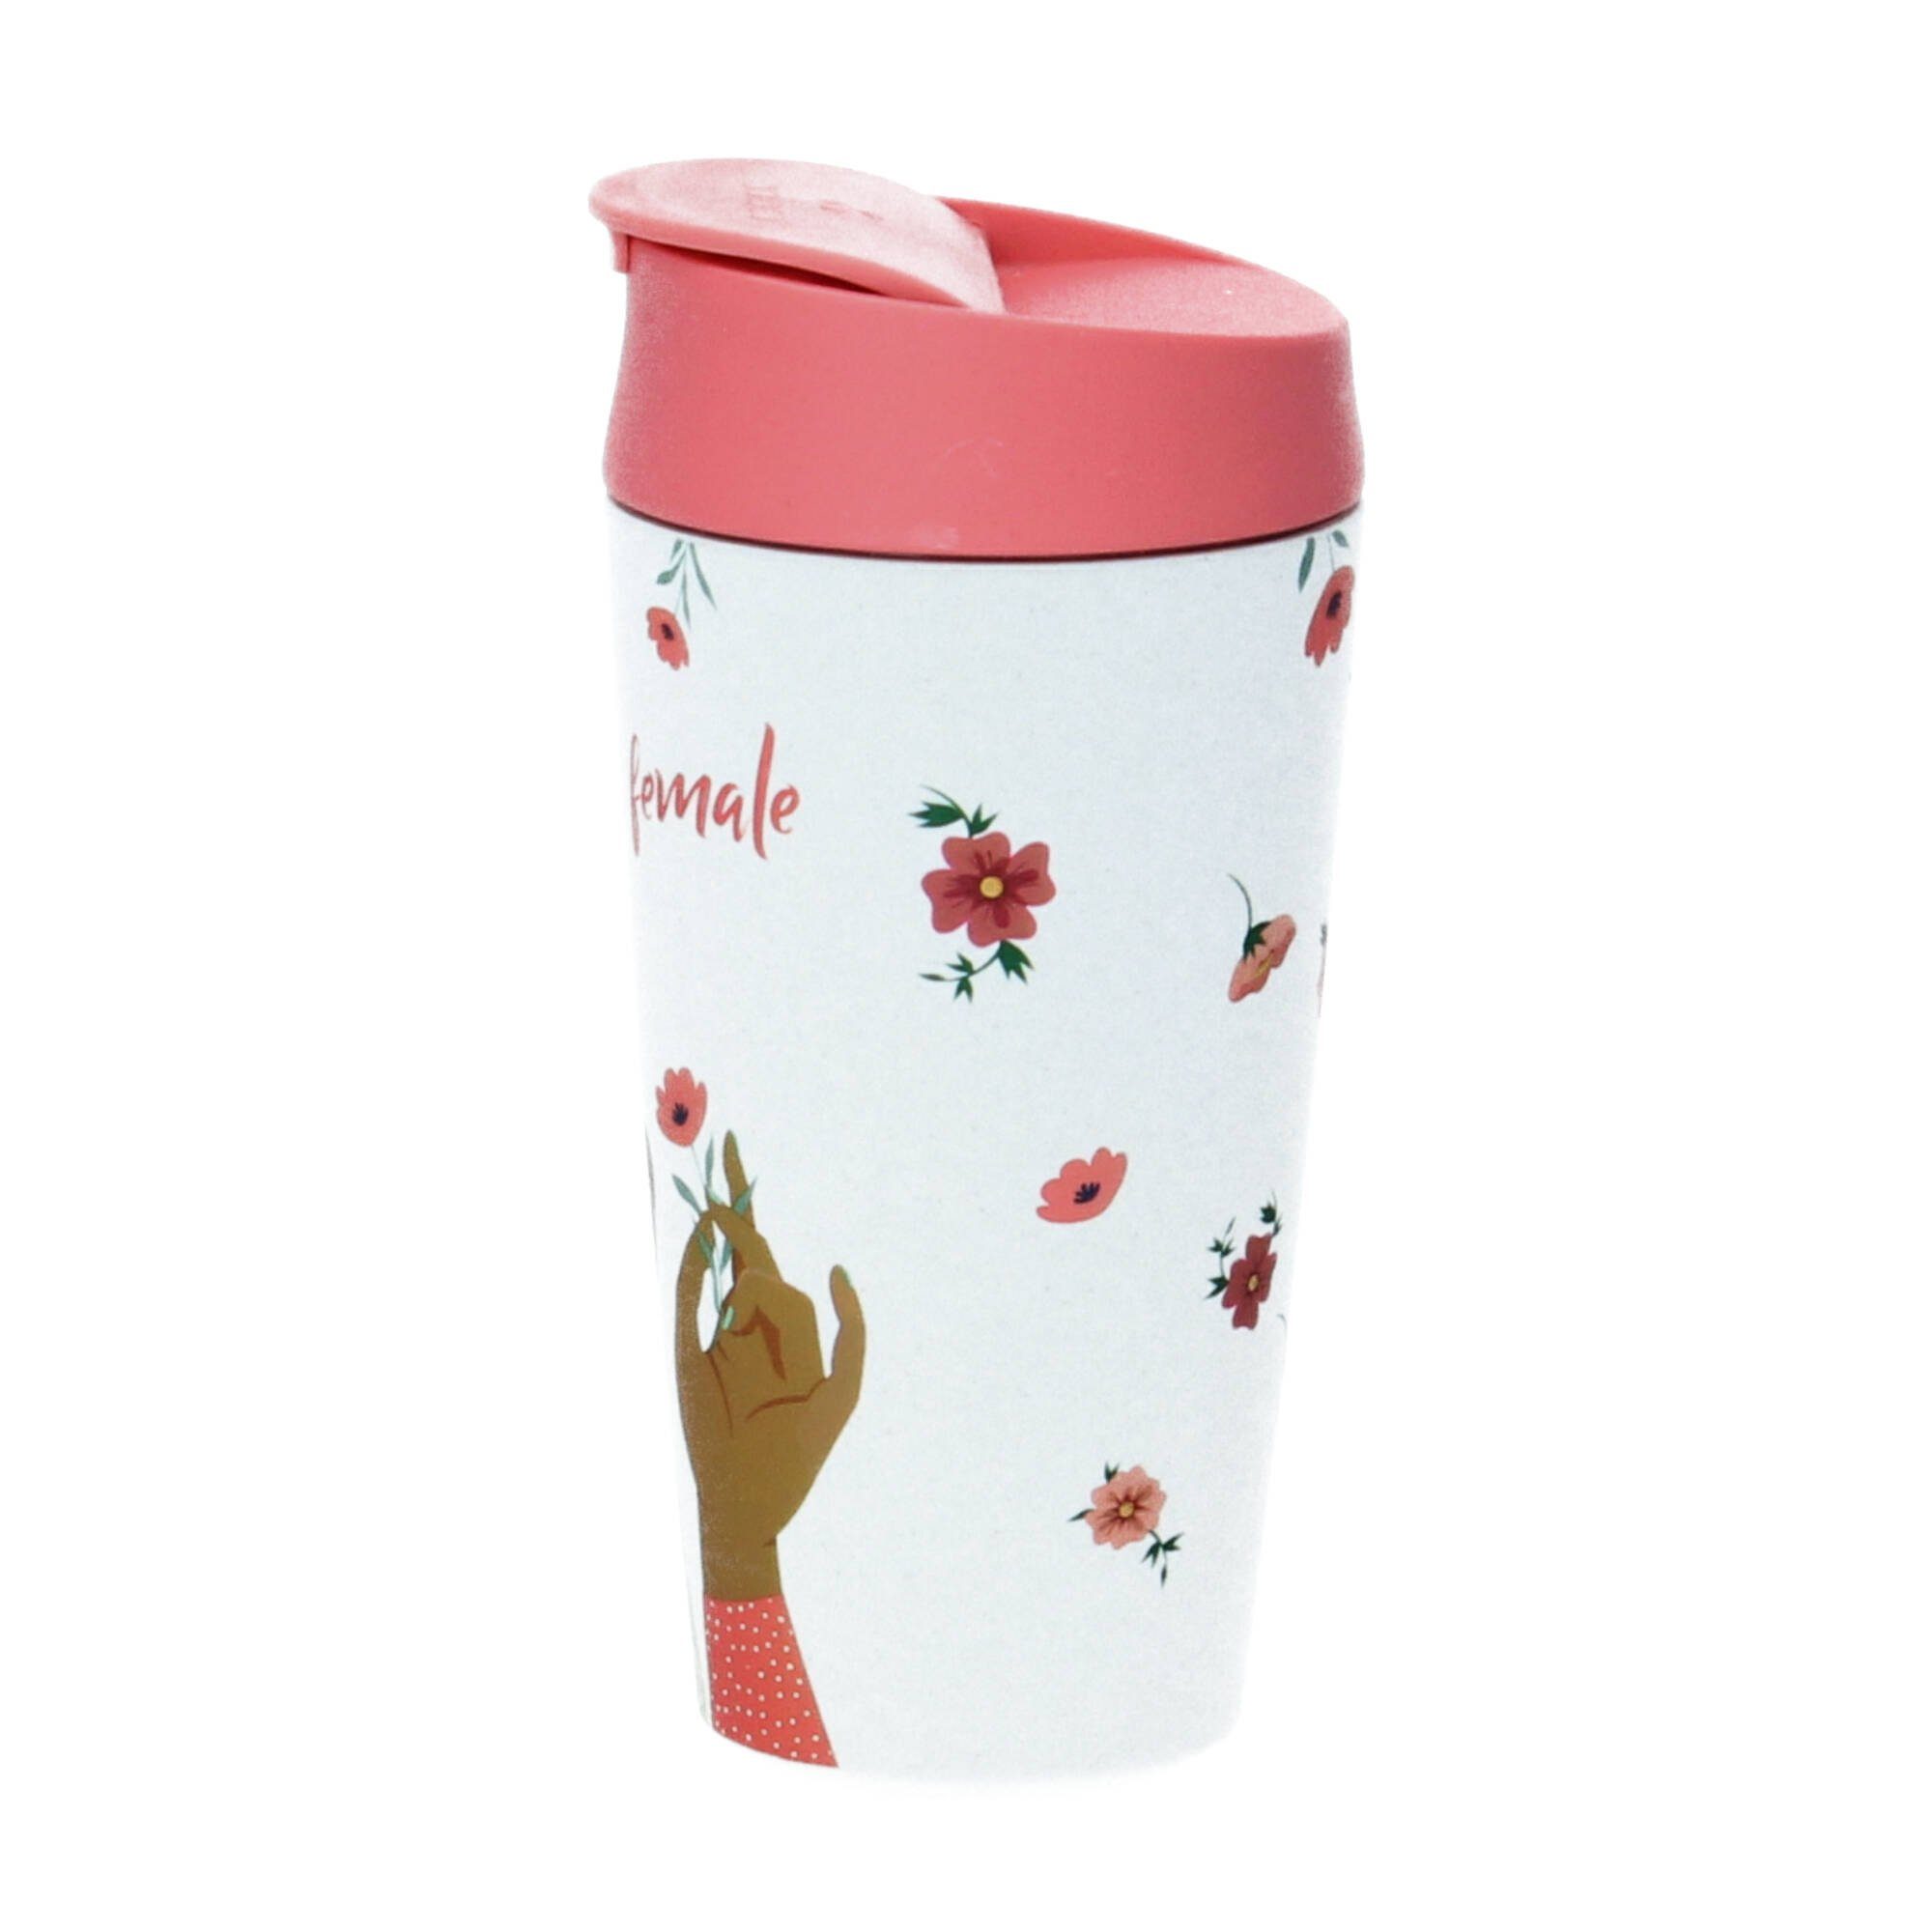 chic mic GmbH cup aus bioloco ml PLA deluxe female, 420 Pflanzenzucker) plant Coffee-to-go-Becher (Kunststoff future is